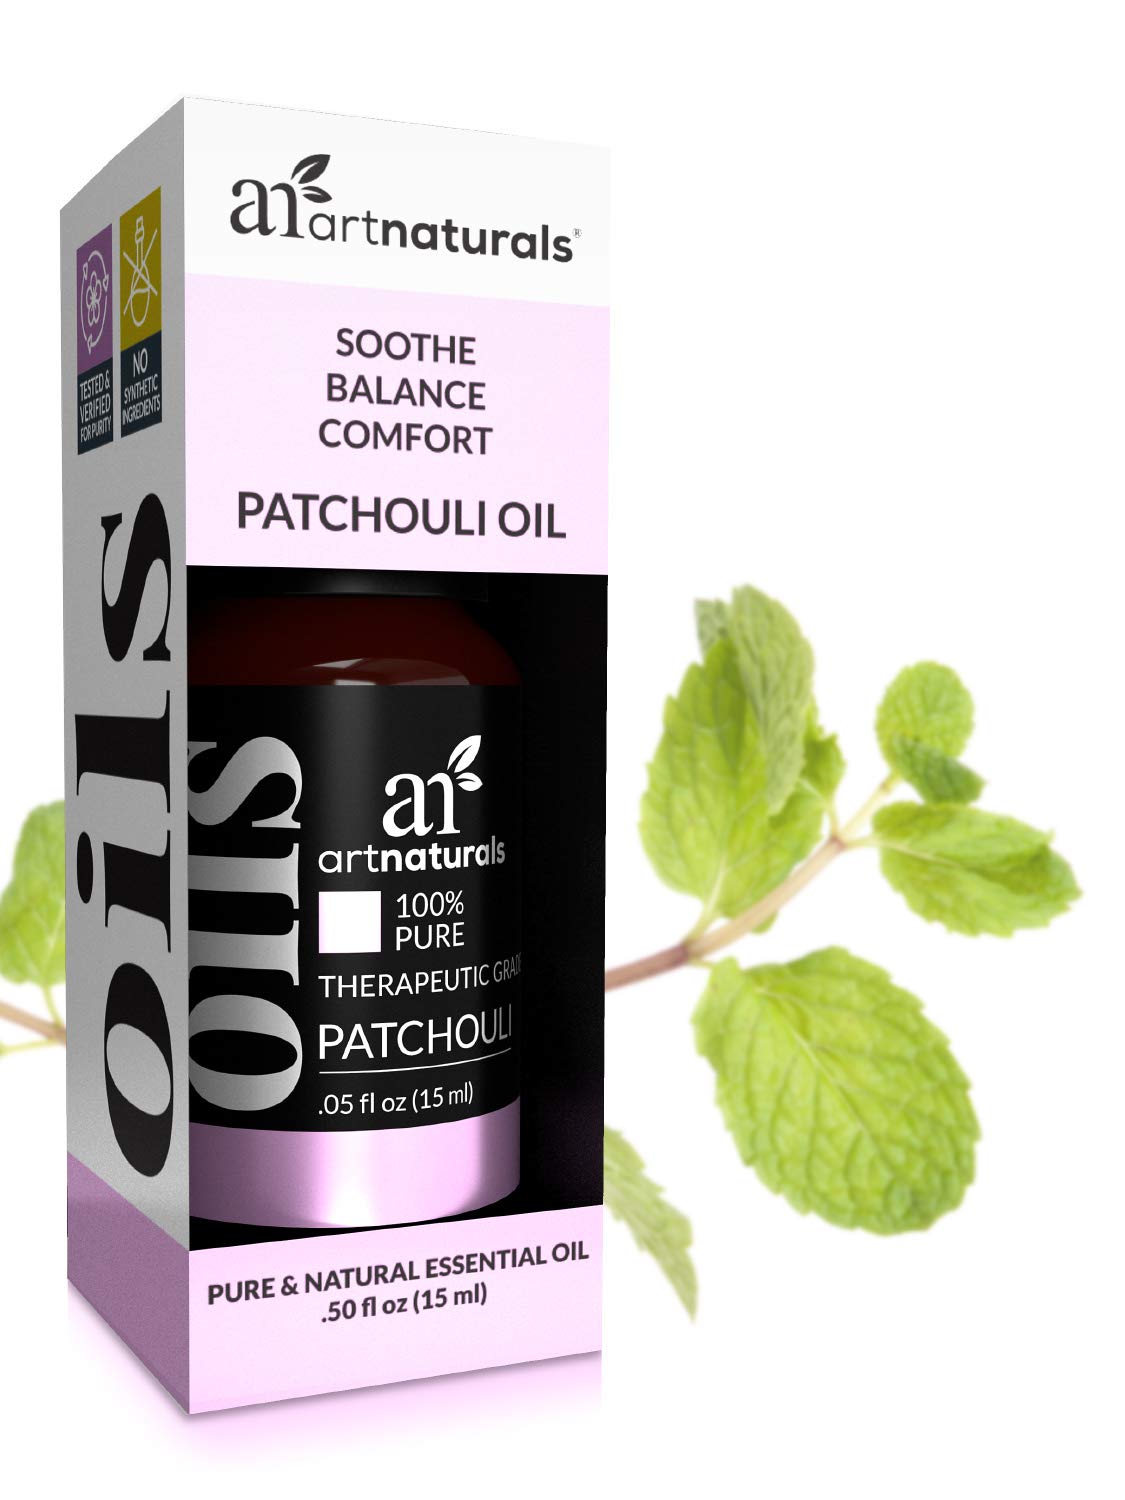 artnaturals 100% Pure Patchouli Essential Oil - (.5 Fl Oz / 15ml) - Undilued Therapeutic Grade Fragrance Oil - Soothe Balance and Comfort - for Diffuser, Skin, Body and Perfume